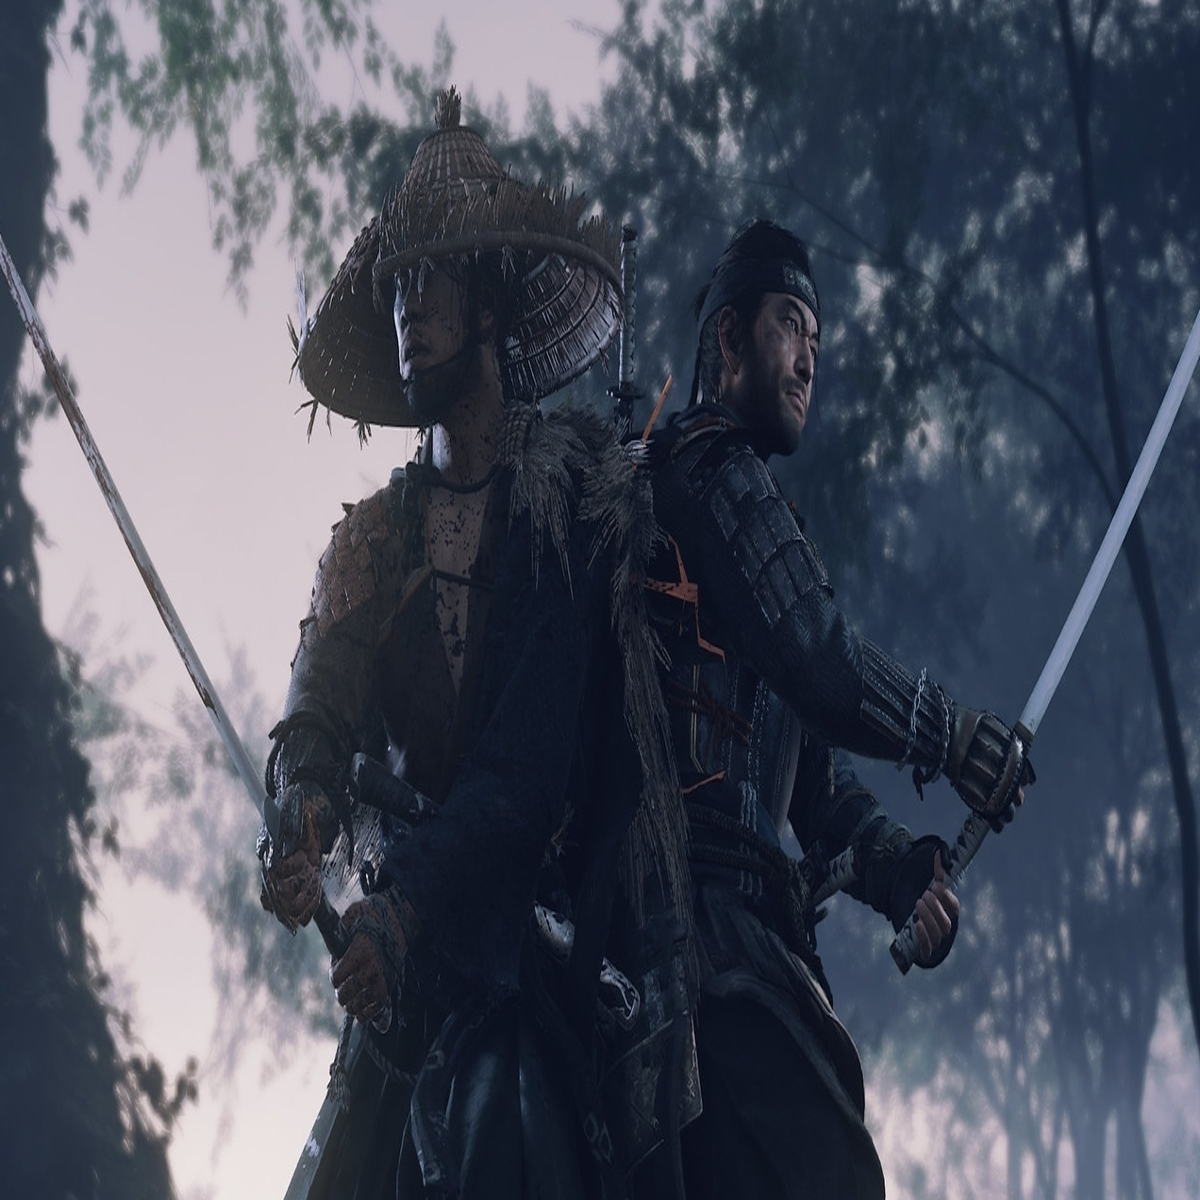 Ghost of Tsushima: Legends gets standalone release, adds new “Rivals” mode  on September 3 – PlayStation.Blog